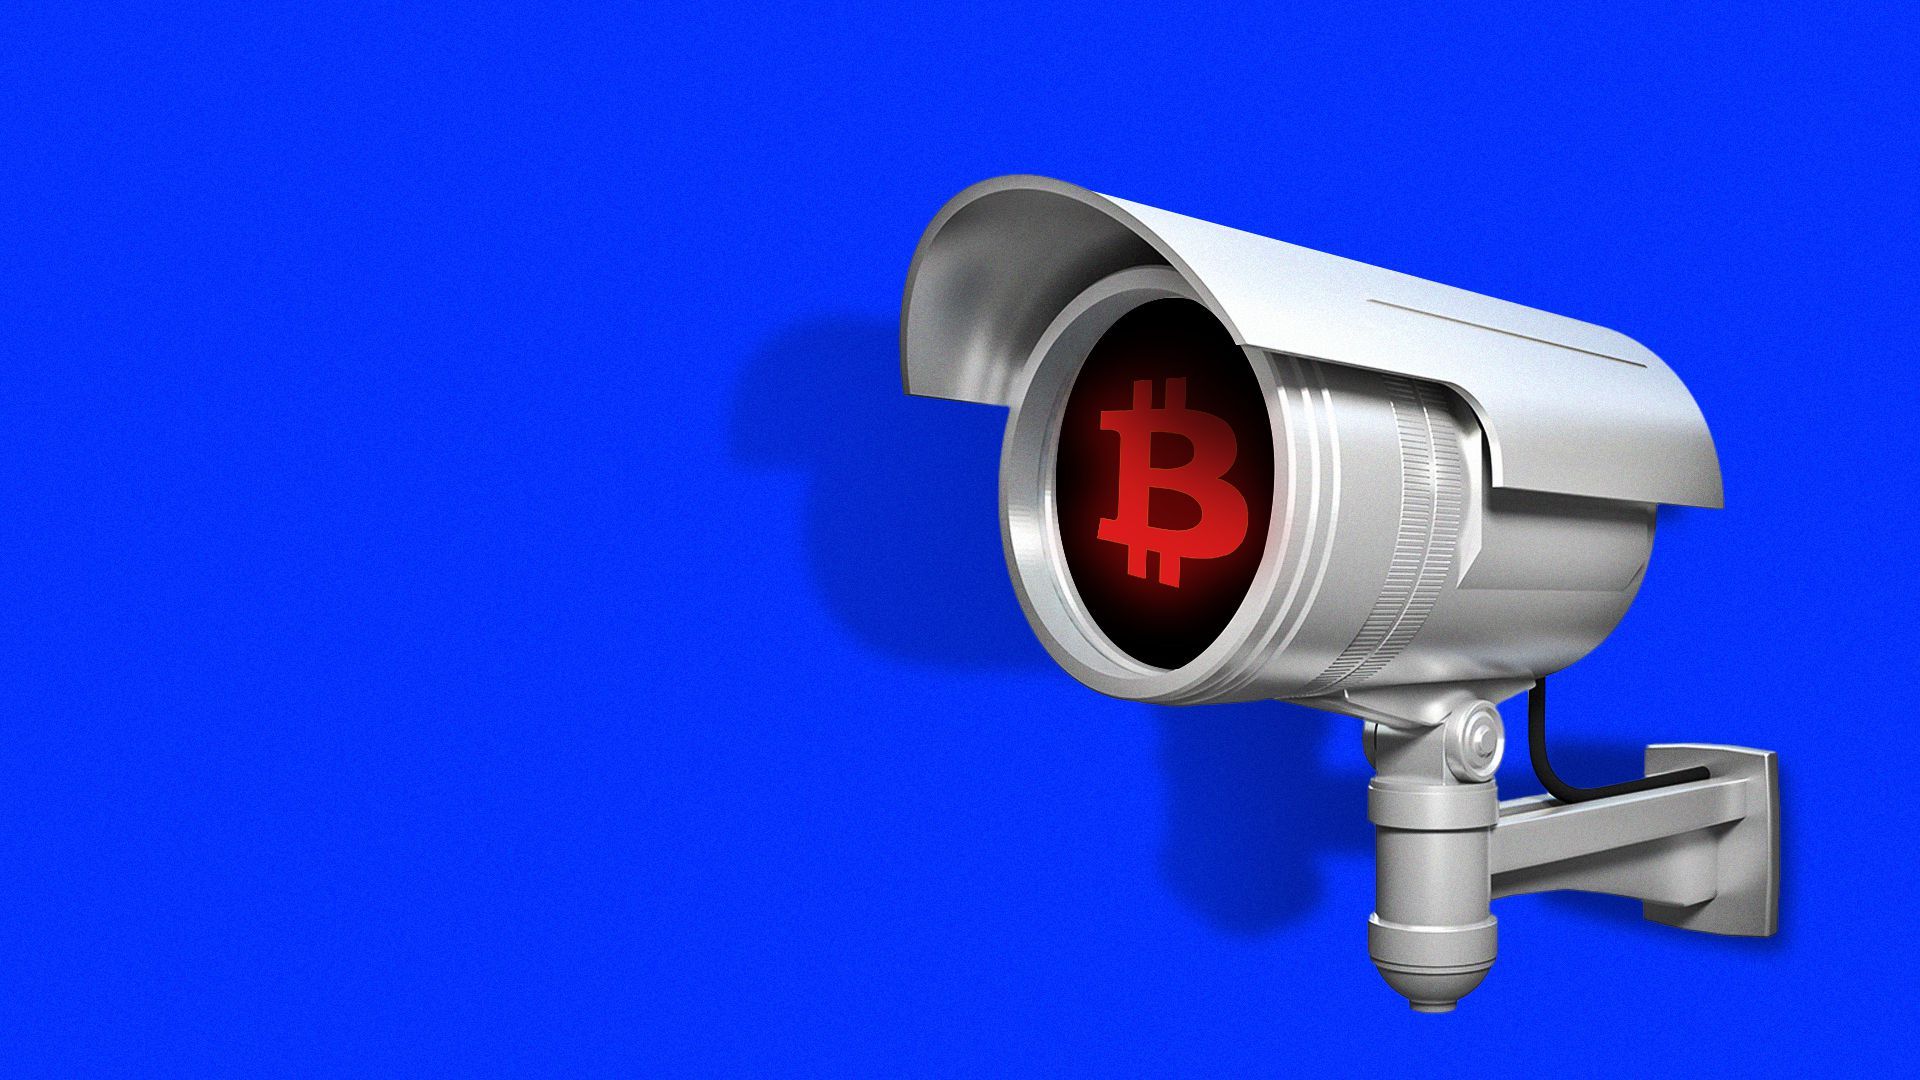 Illustration of a security camera with a glowing bitcoin symbol on the lens